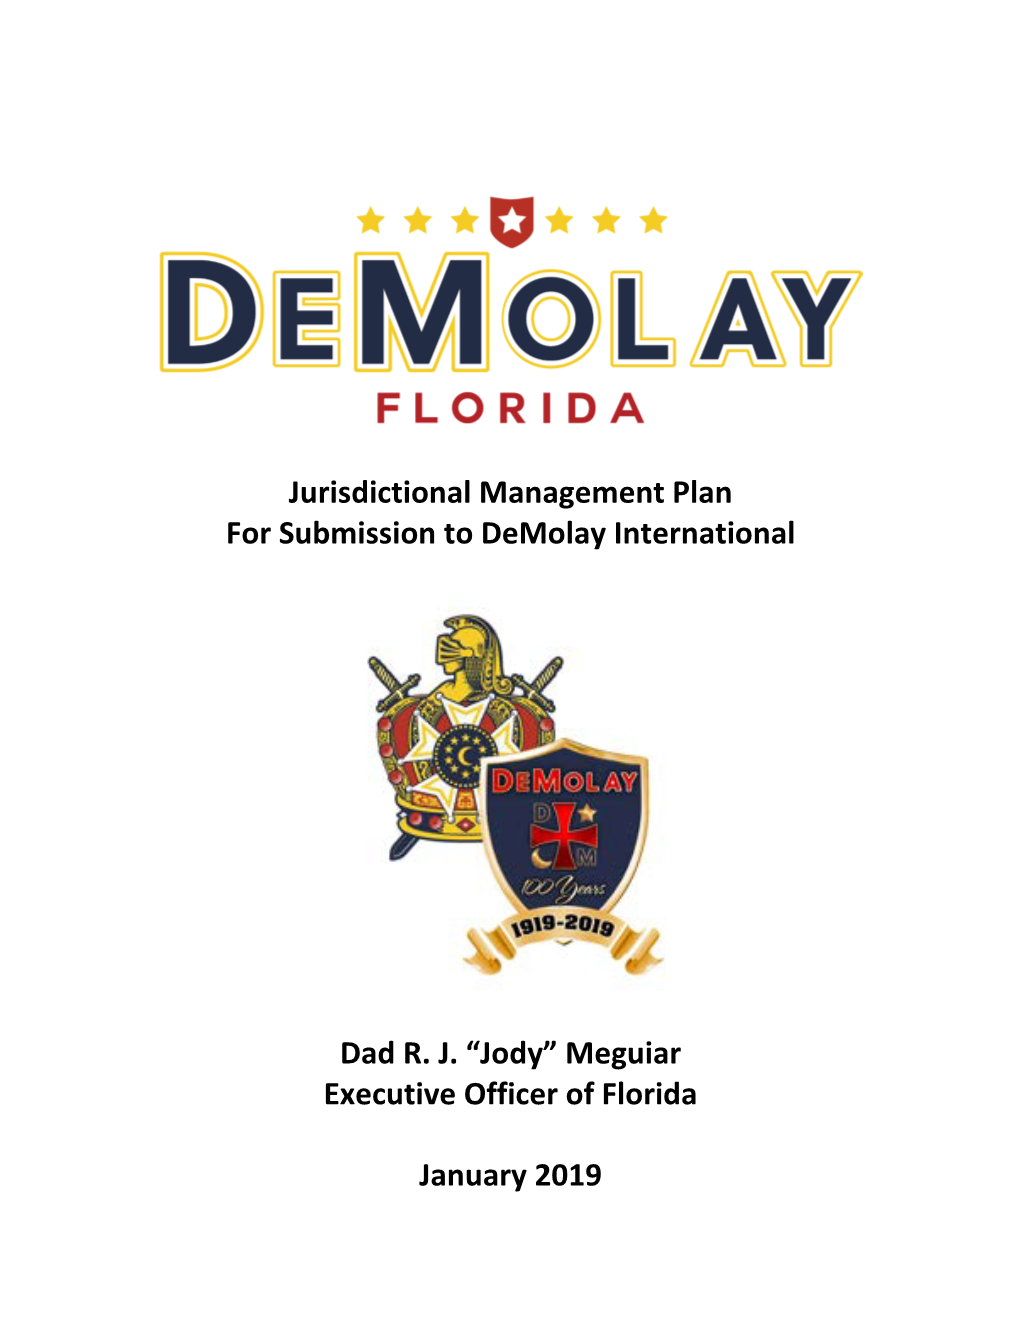 Jurisdictional Management Plan for Submission to Demolay International